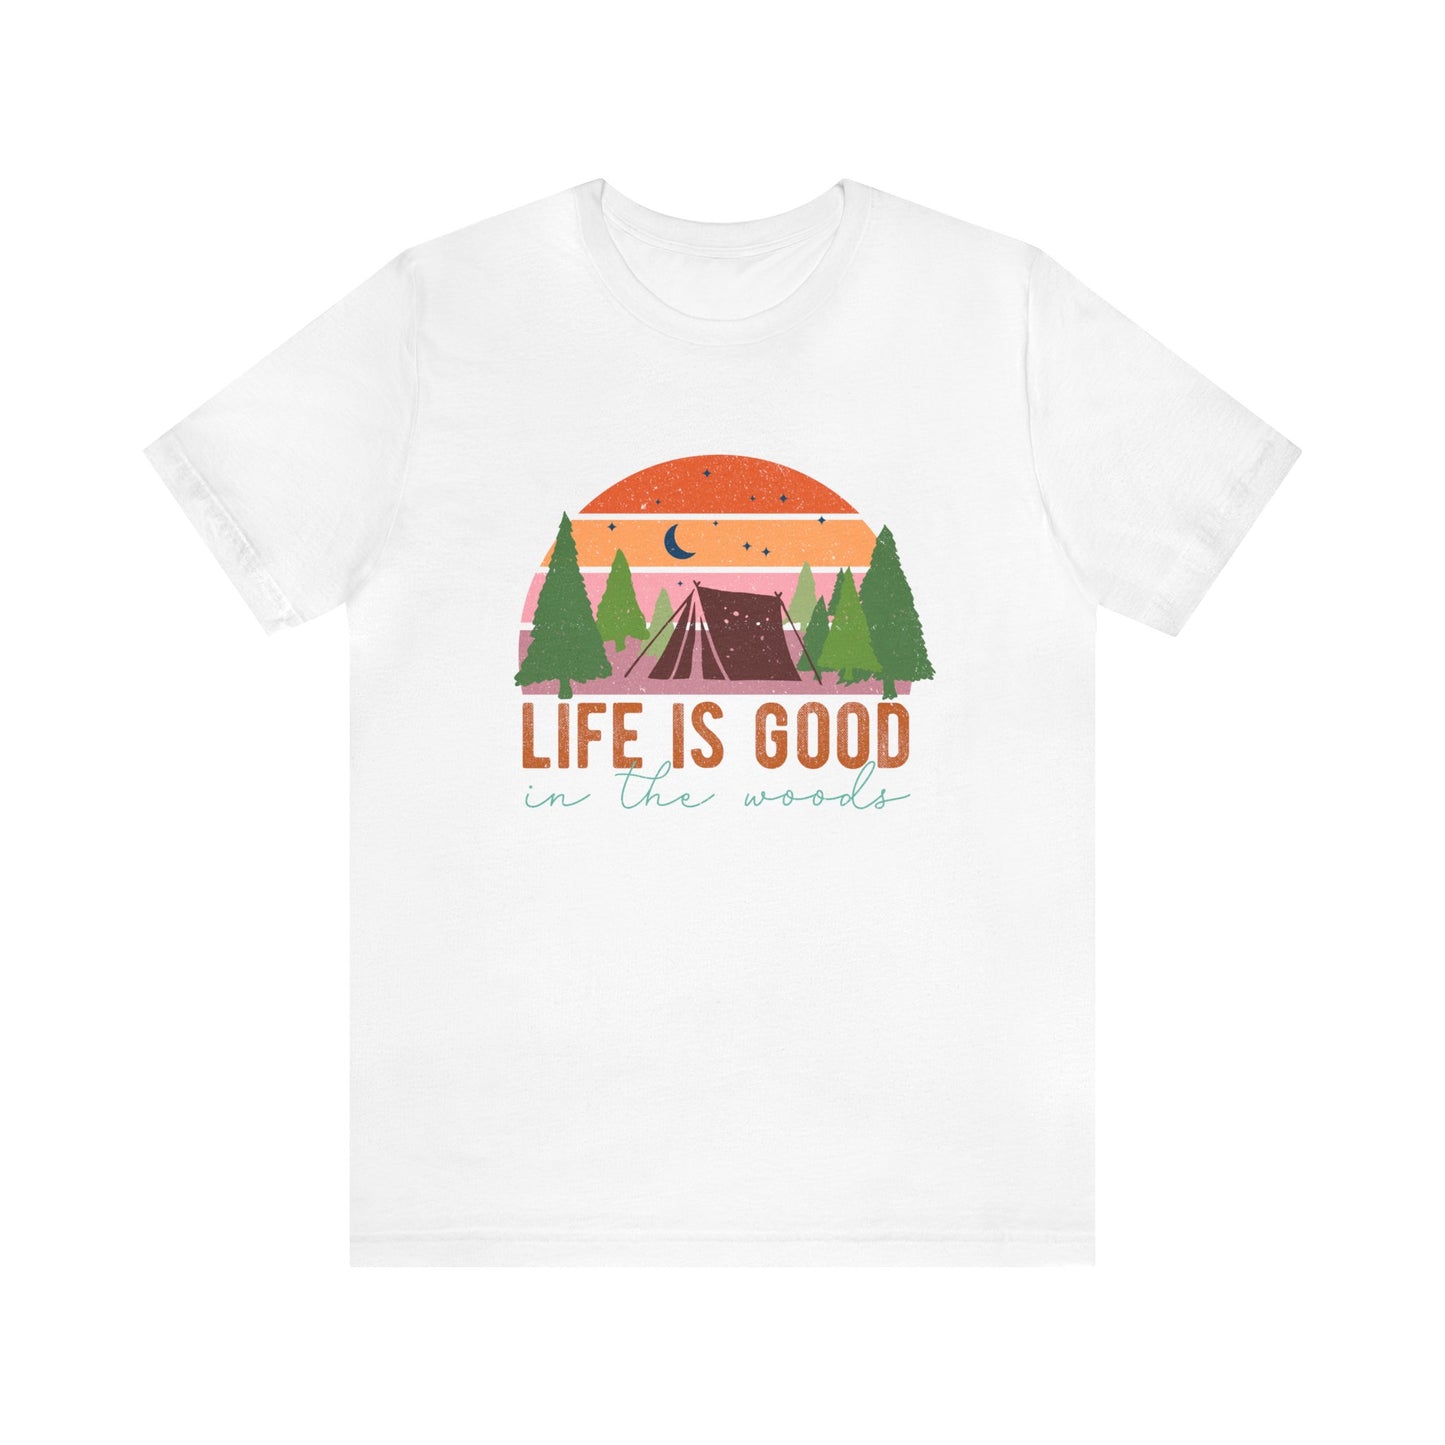 Life is good in the woods camping vacation adult unisex Tshirt